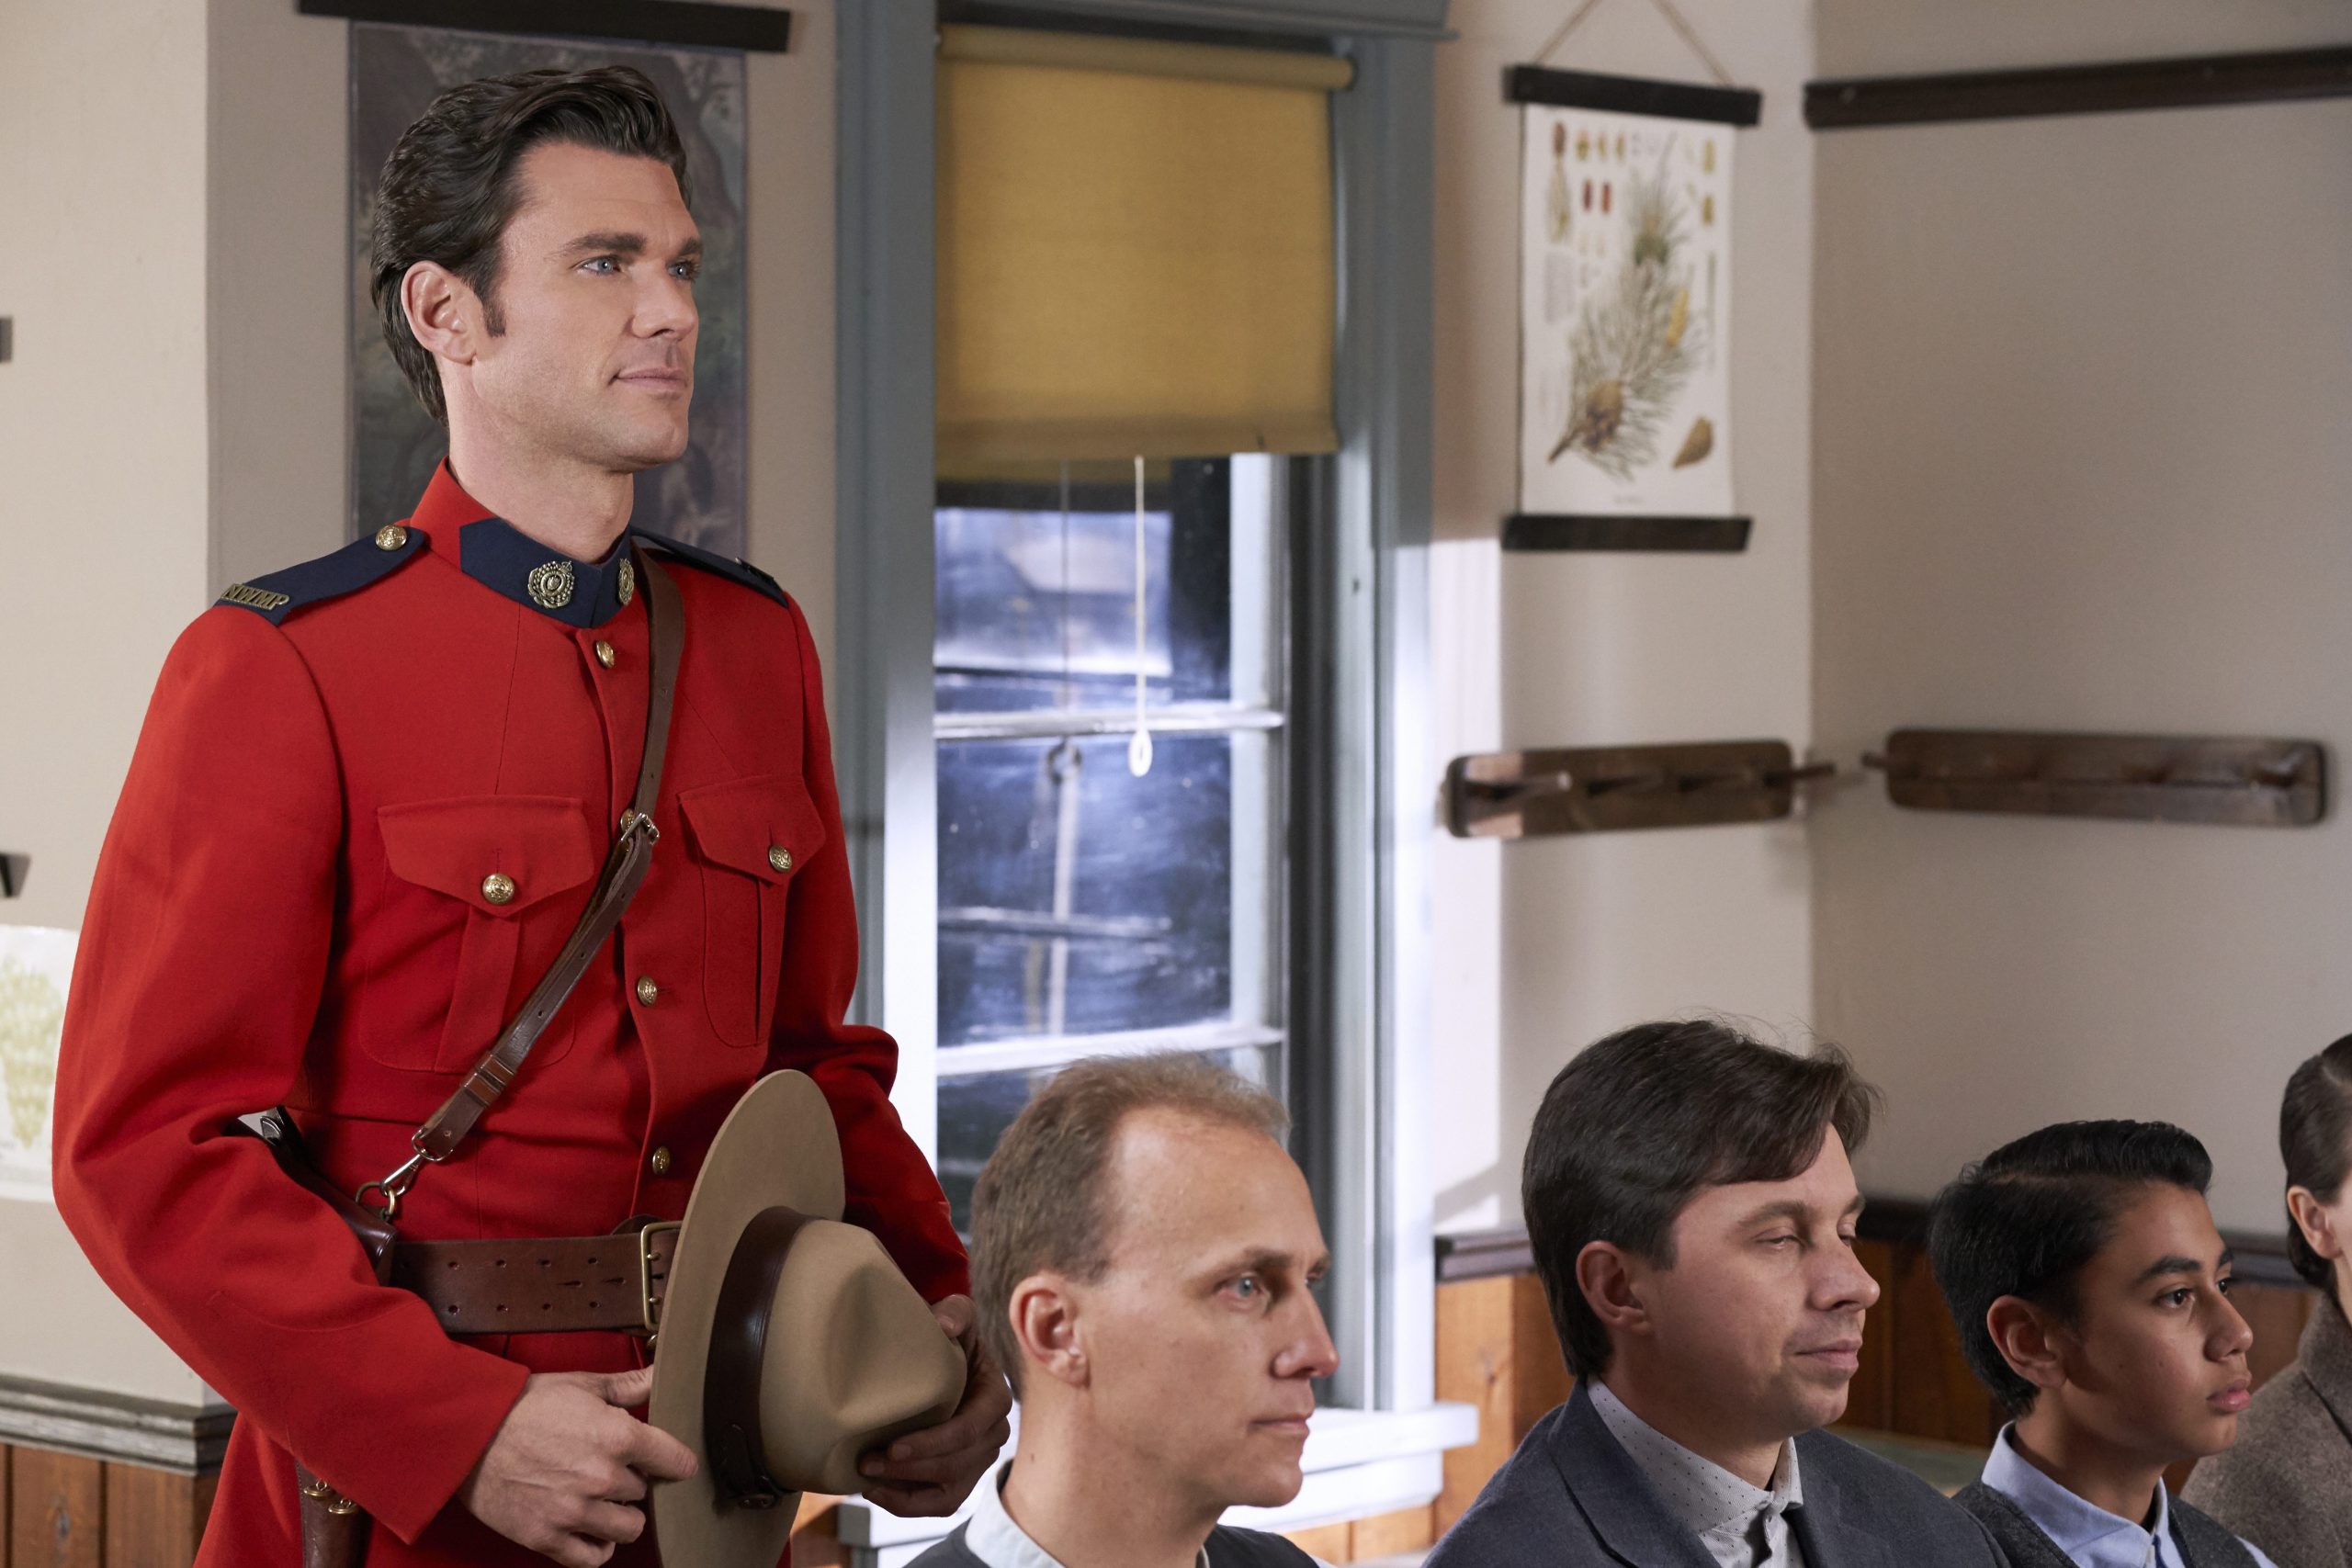 Kevin McGarry as Nathan, wearing red jacket and holding his hat, in 'When Calls the Heart' 